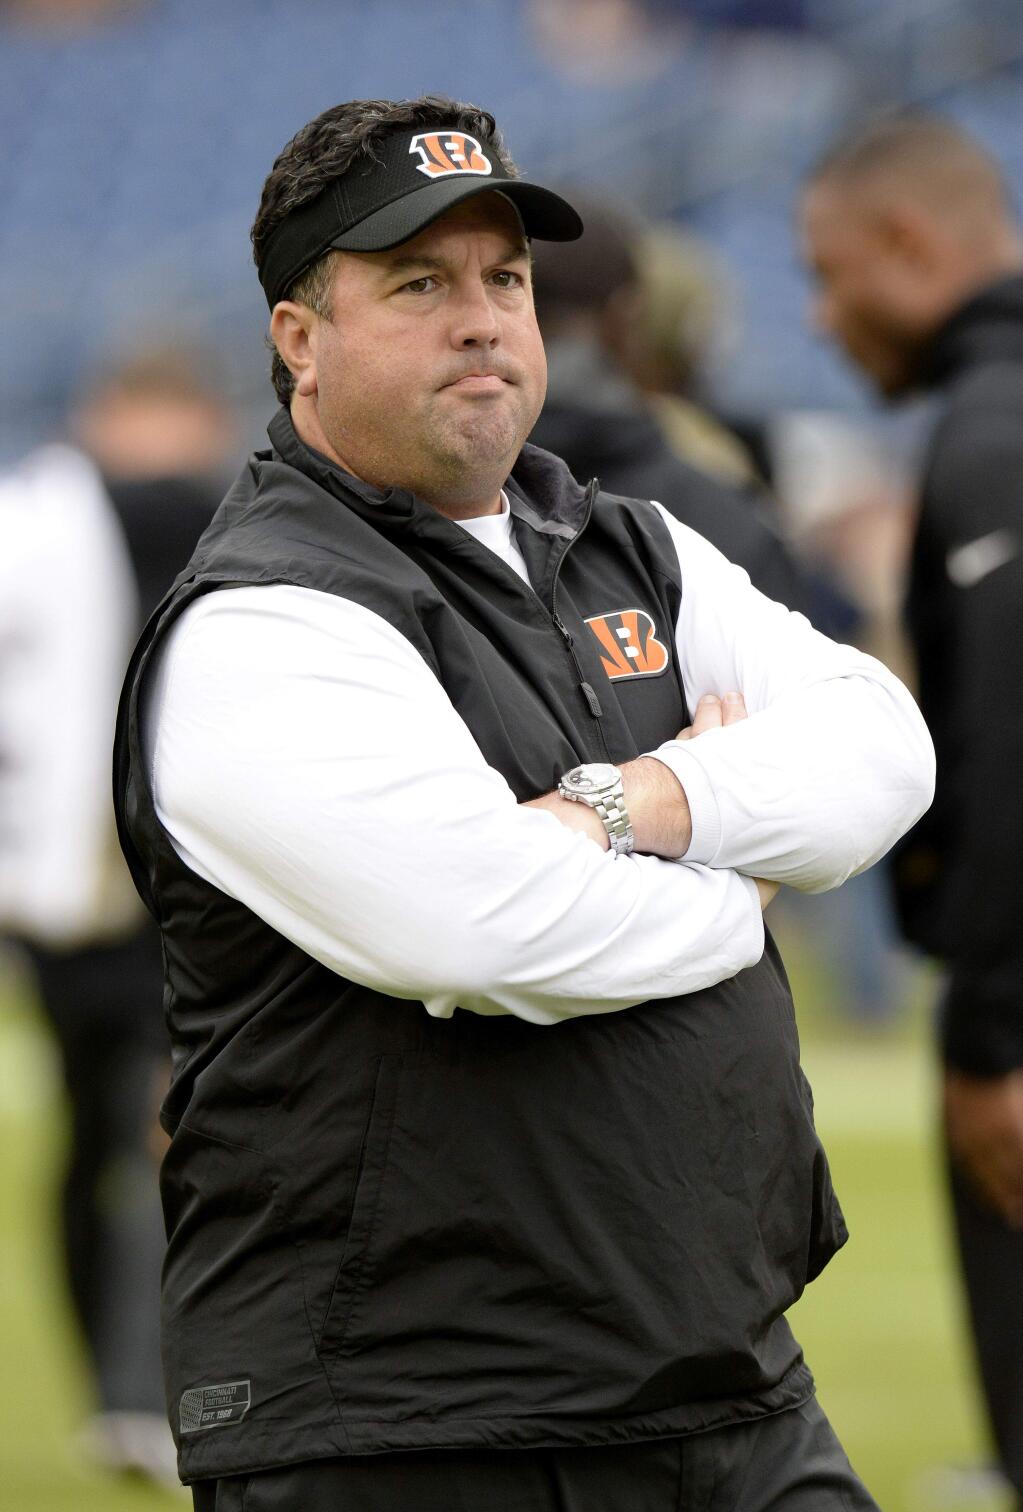 Cincinnati Bengals defensive coordinator Paul Guenther watches players warm up before a game between the Bengals and the Tennessee Titans Sunday, Nov. 12, 2017, in Nashville, Tenn. (AP Photo/Mark Zaleski)